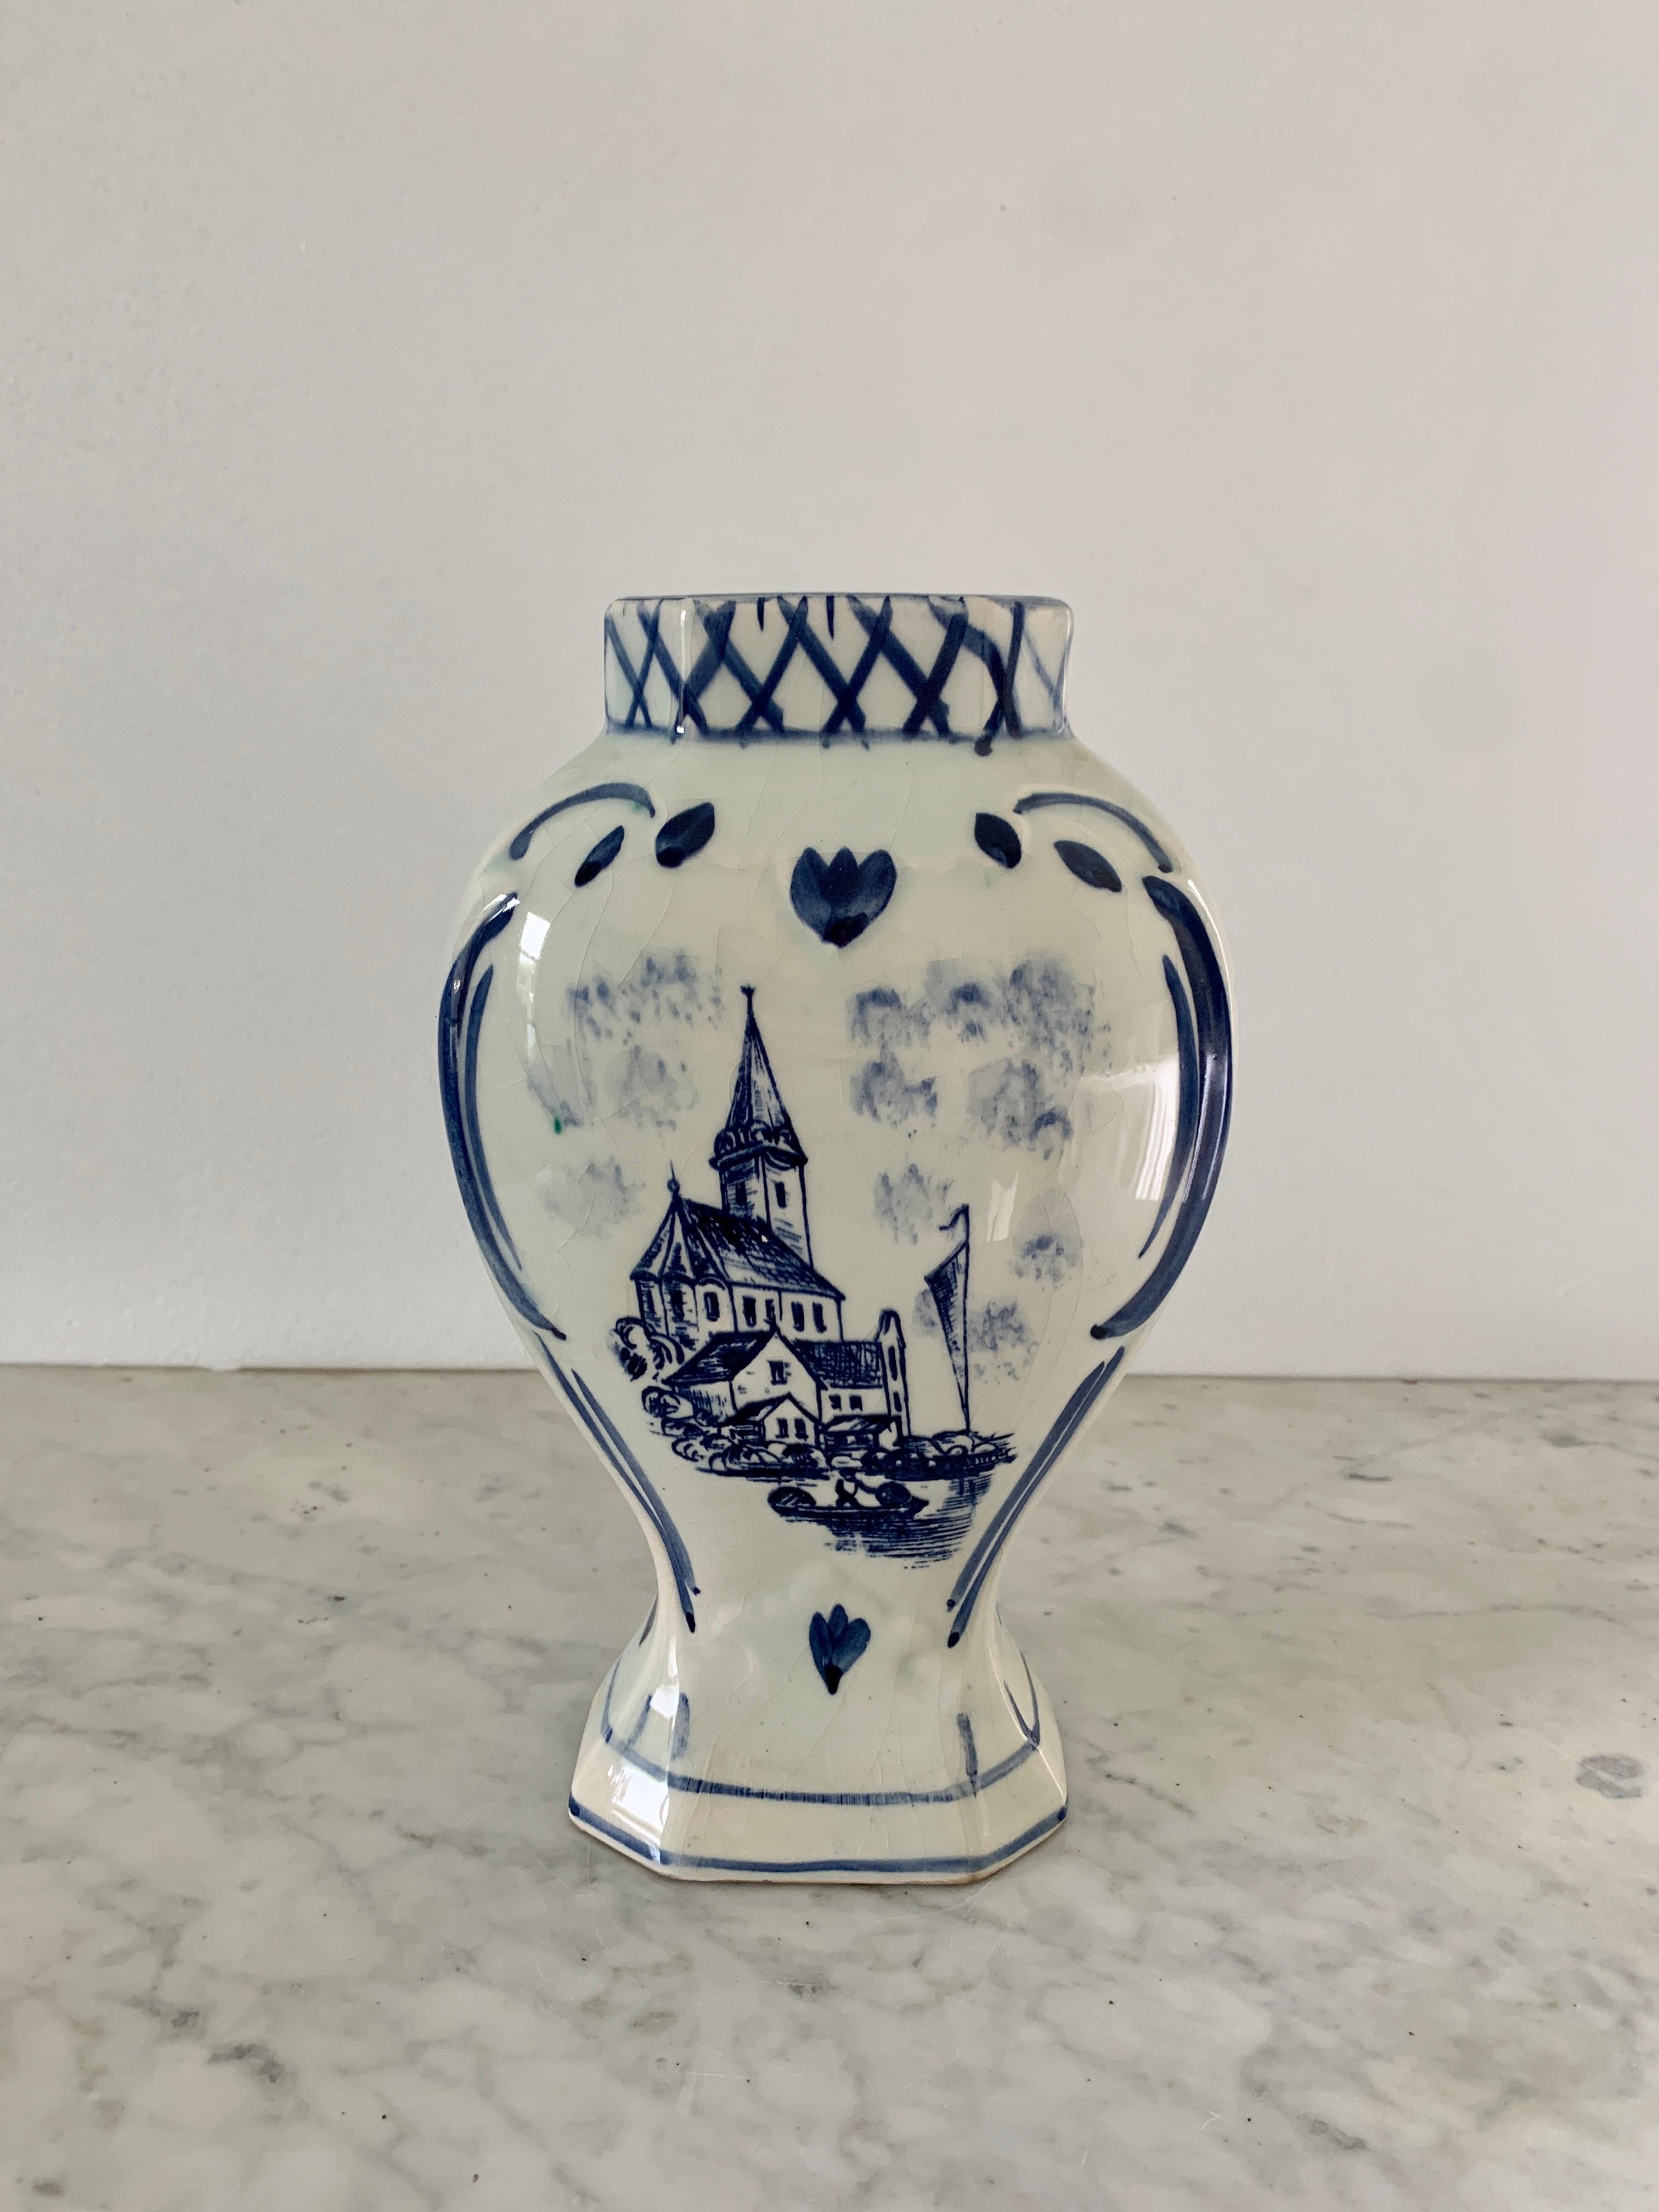 A beautiful hand painted blue and white Delft porcelain vase with a painted village scene

Holland, Circa 1960s

Measures: 5.75